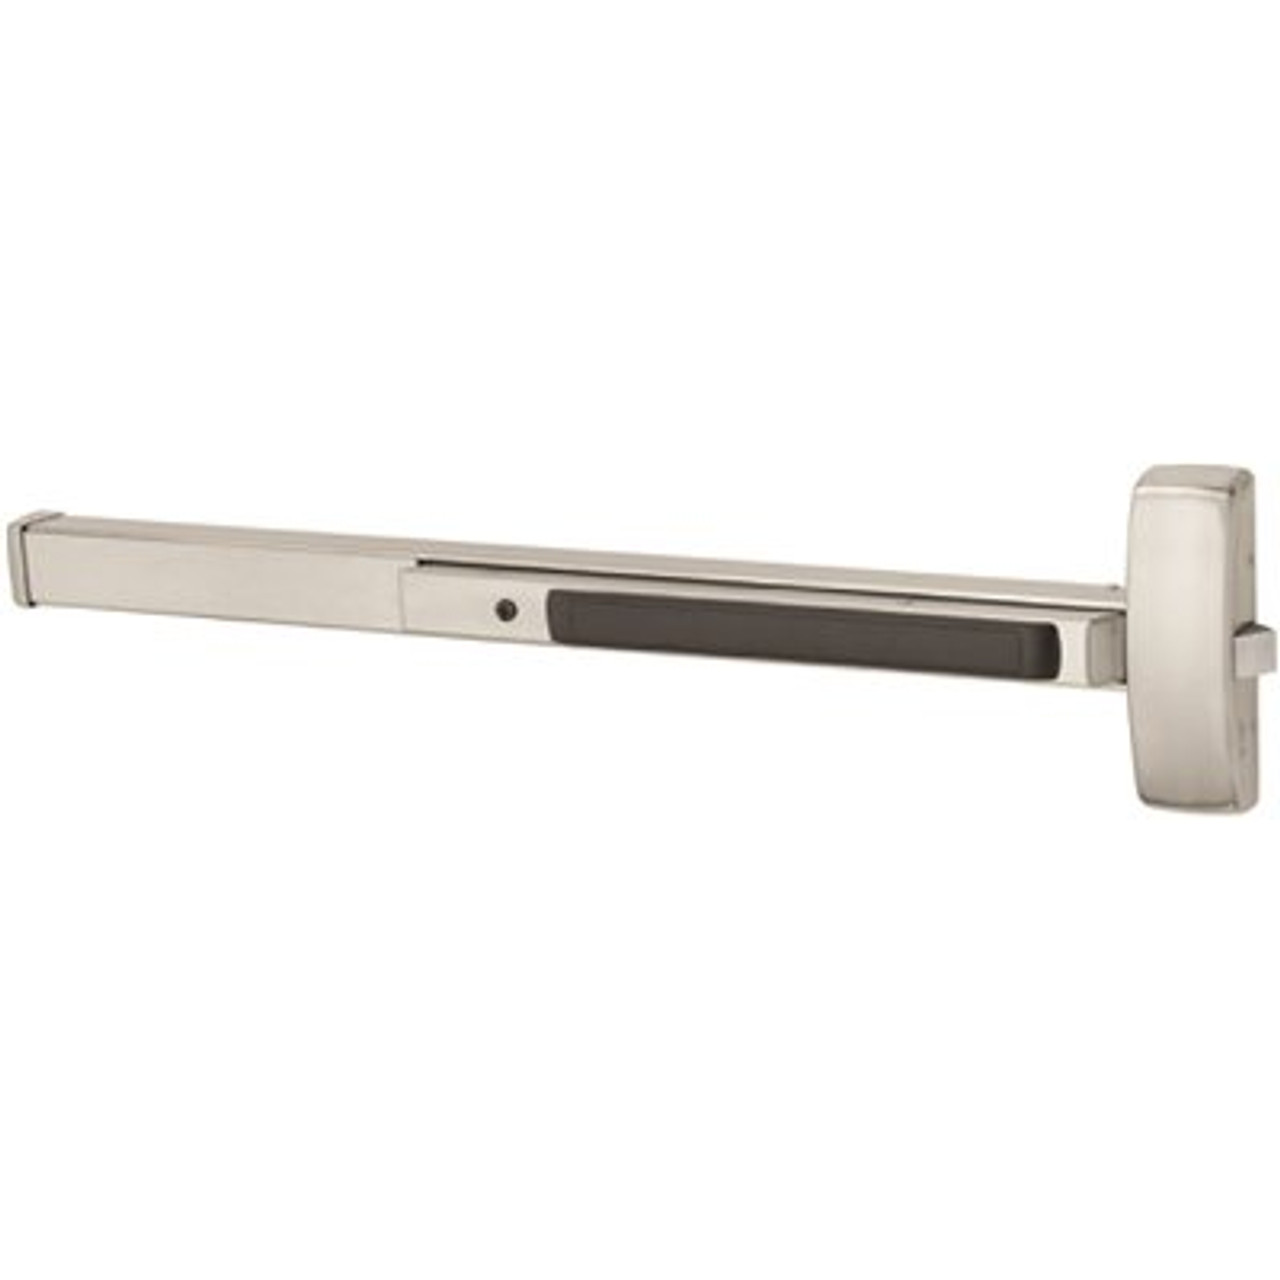 Sargent 80 Series Grade 1,36 In. Stainless Steel Finish Right Hand Reverse Electrified Surface Exit Device